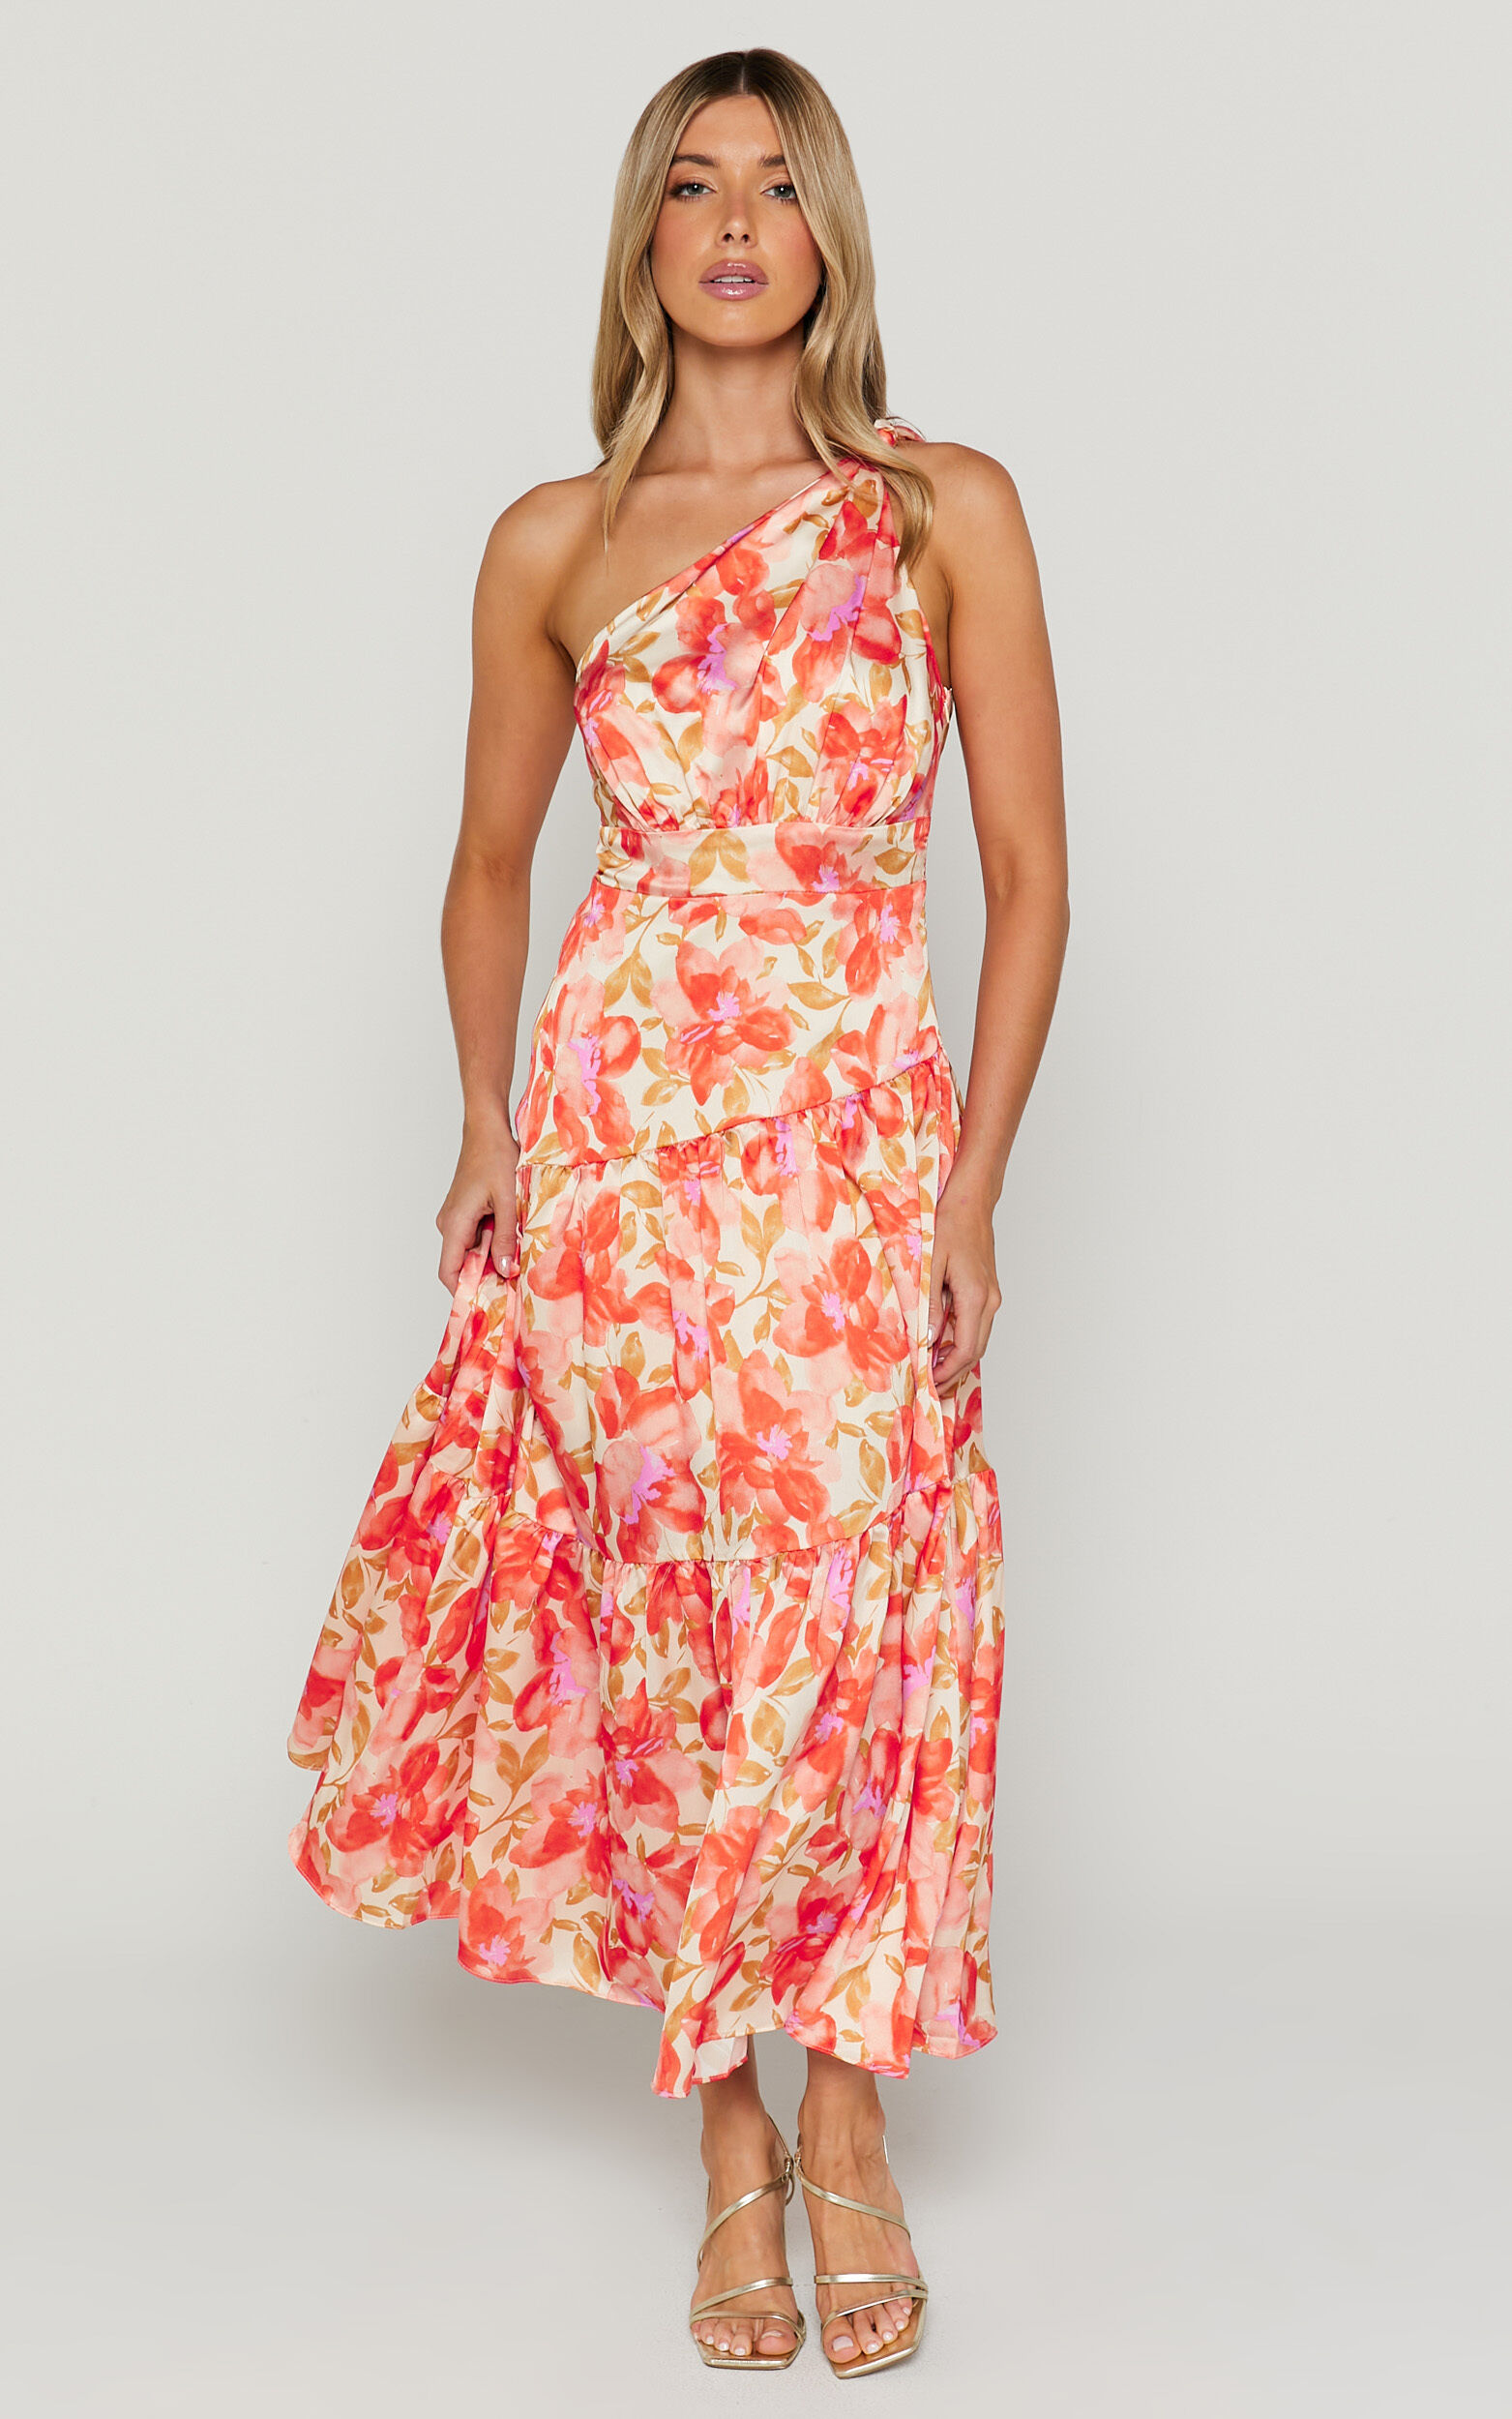 Georgine Midi Dress - One Shoulder Ruched Tiered Dress in AUTUMN FLORAL - 06, ORG1